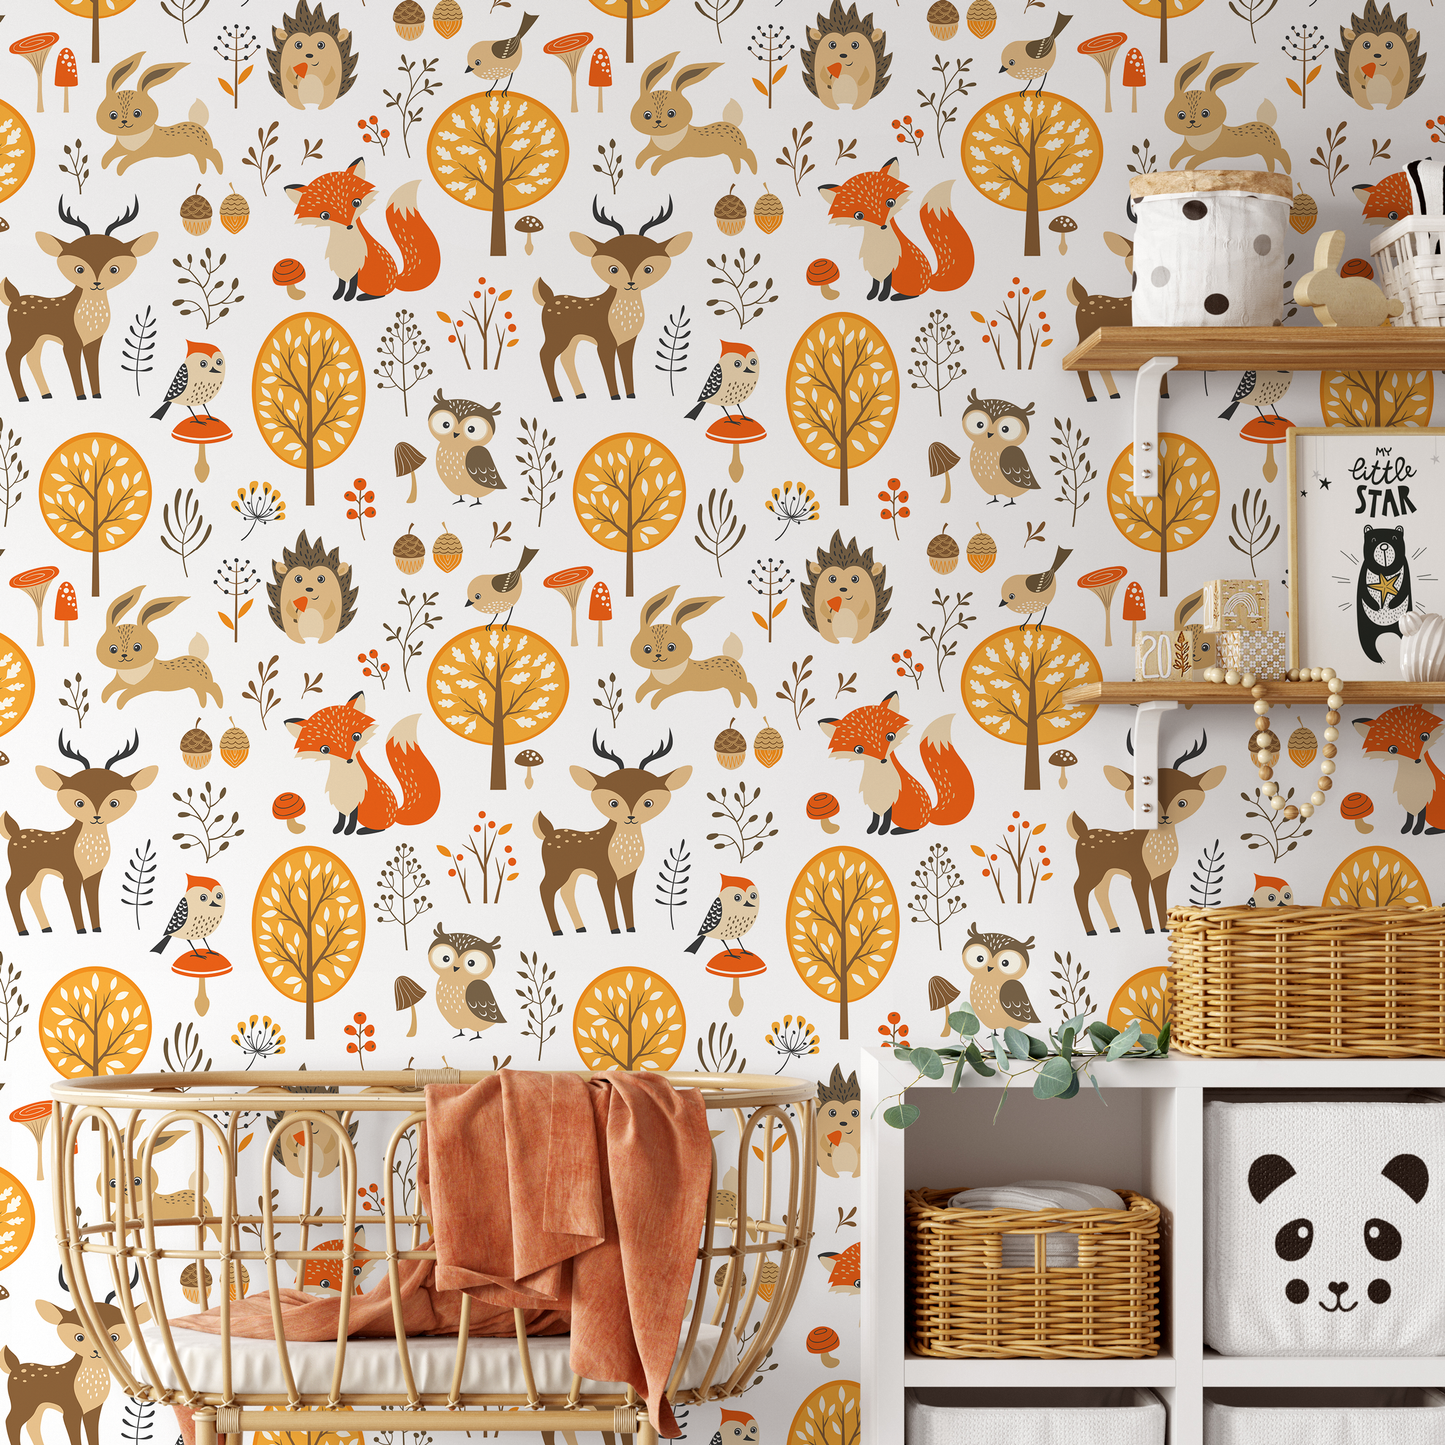 Wallpaper Peel and Stick Wallpaper Removable Wallpaper Home Decor Wall Art Wall Decor Room Decor / Cute Animal Kids Wallpaper - A082